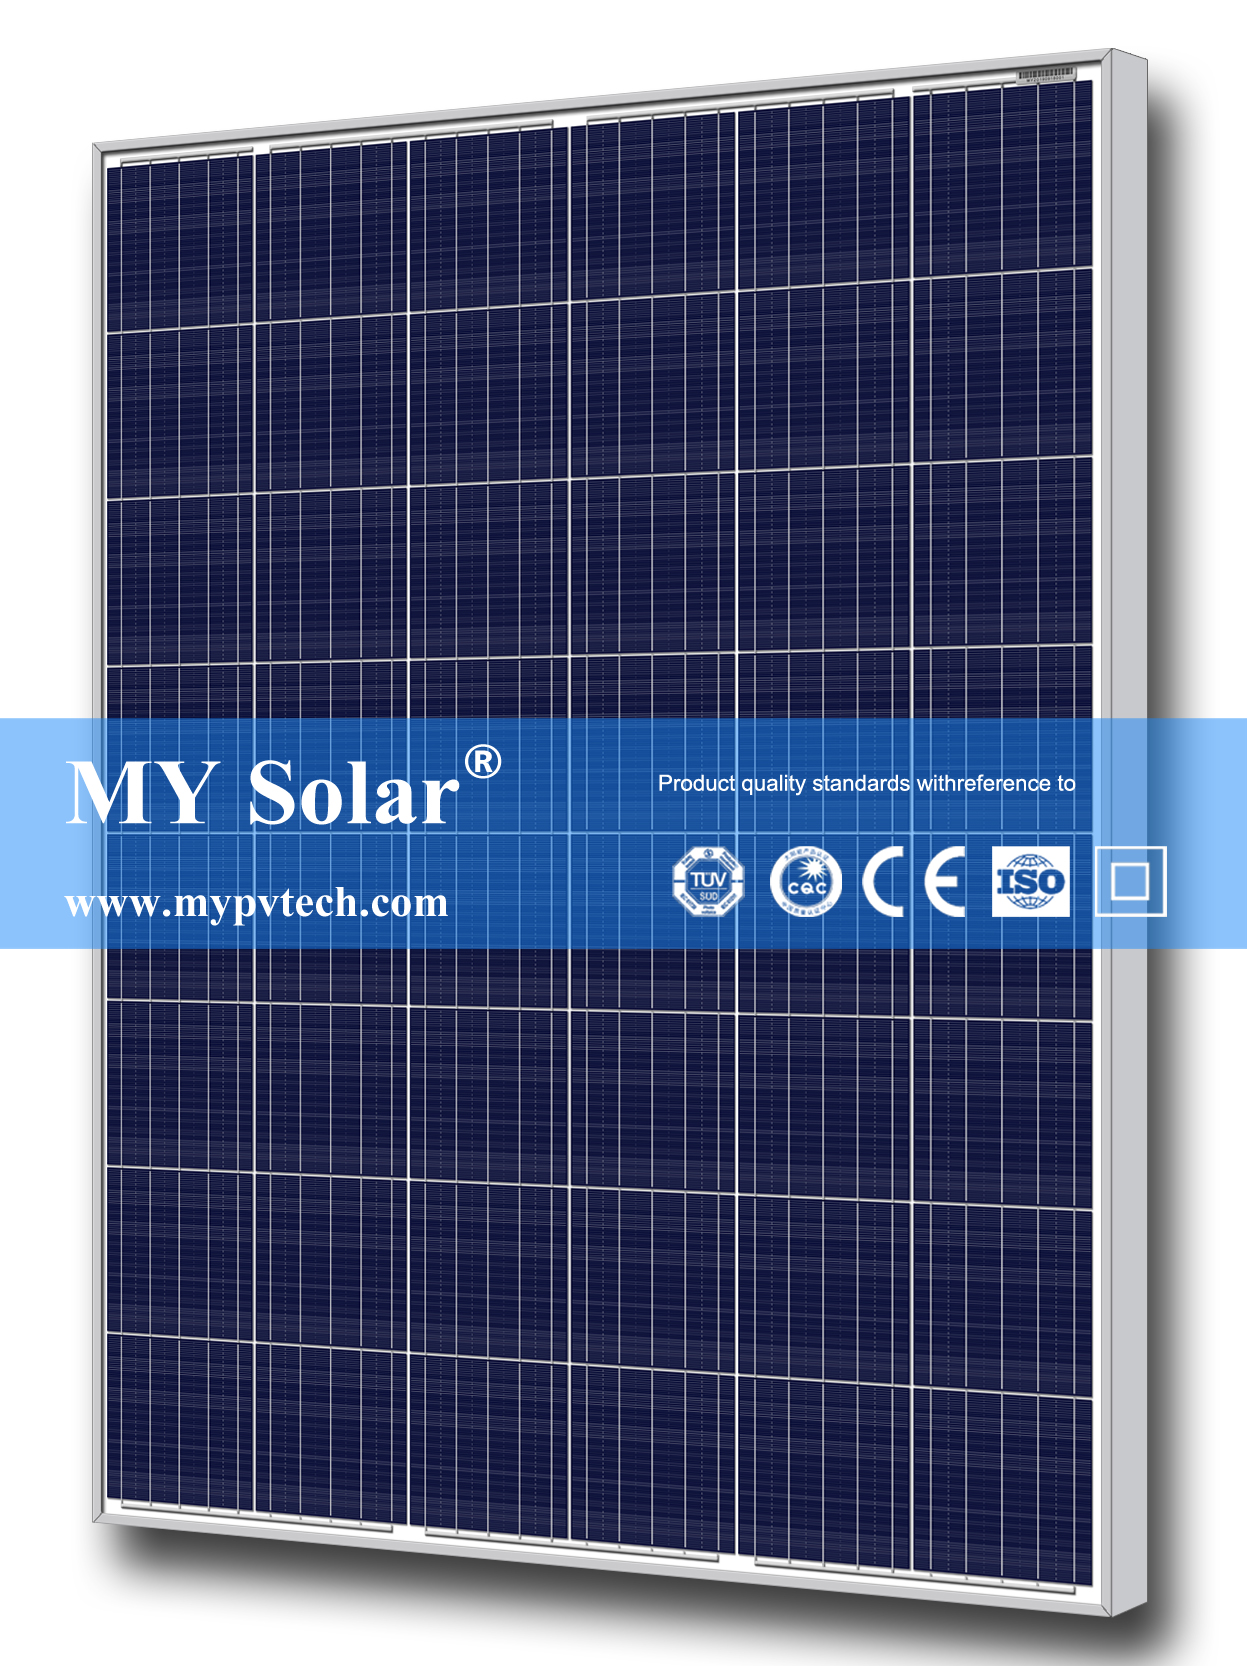 China wholesale Poly Solar Panel - High Efficiency 215-235W PV Monocrystalline Polycrystalline Solar Panel and Home Solar Power System and Solar Module – My Solar